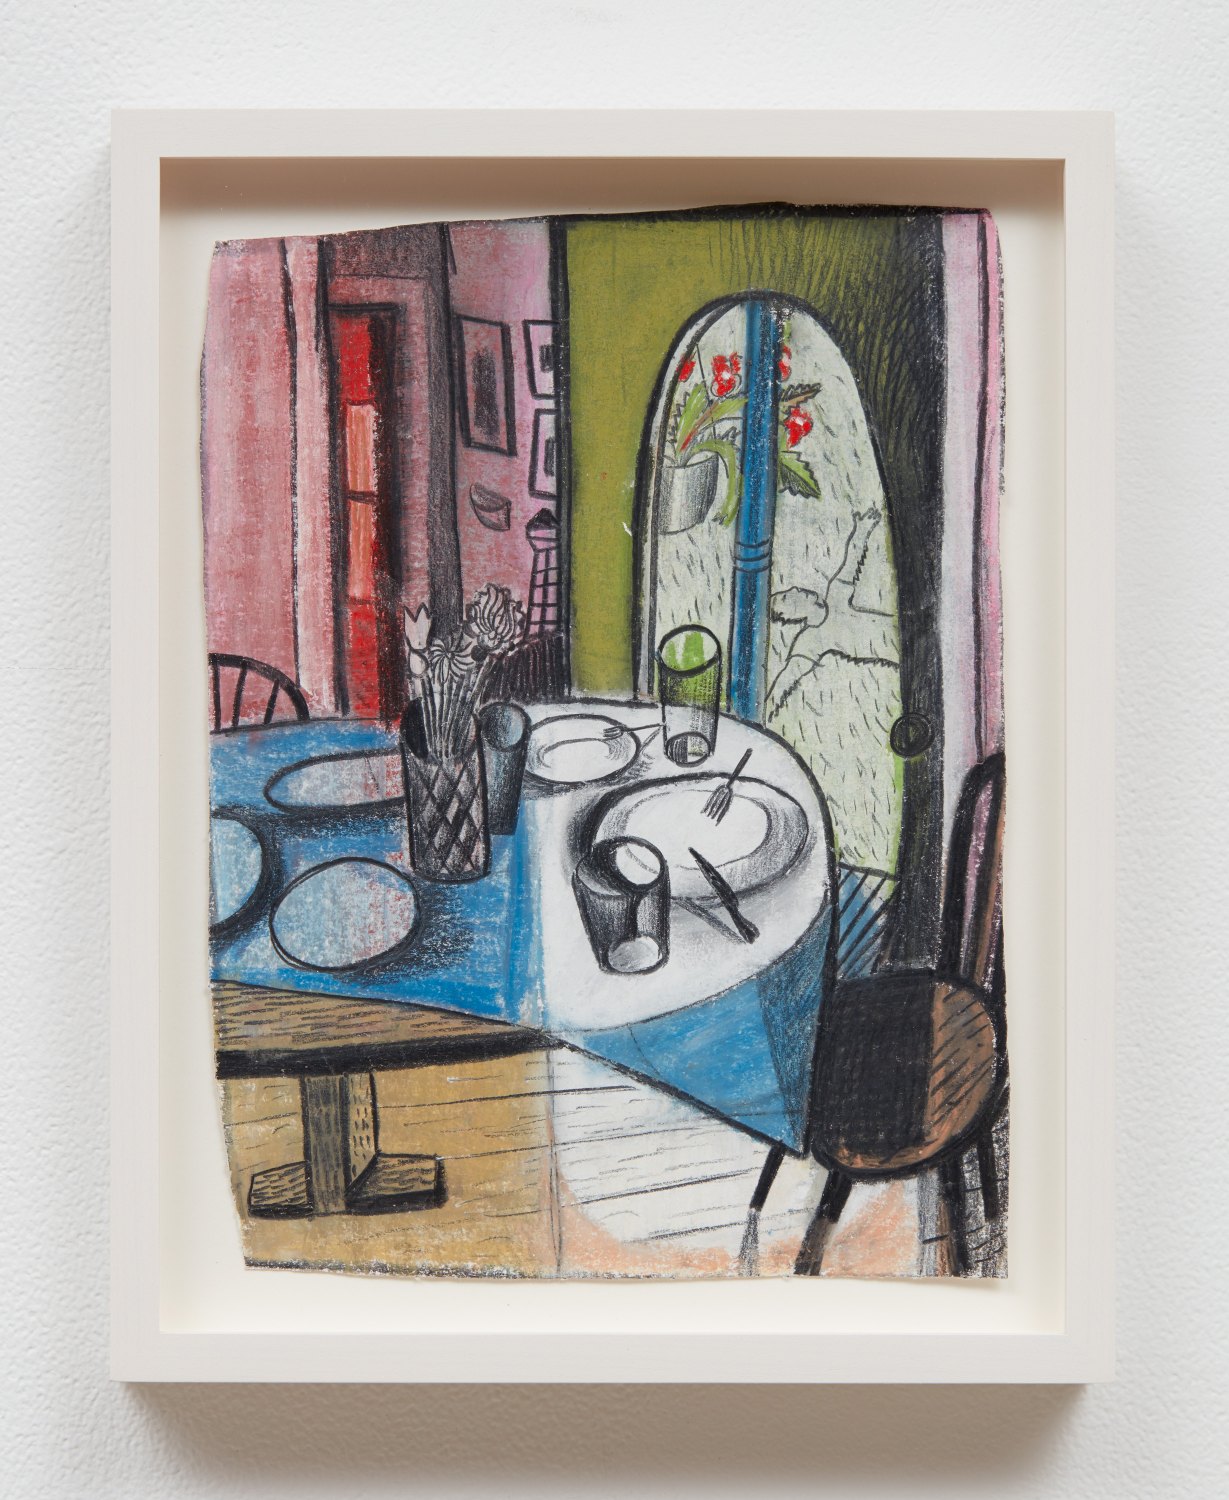 Louis Fratino Home Interior, 2020 Chalk pastel and graphite on paper 20.5 x 15 cm